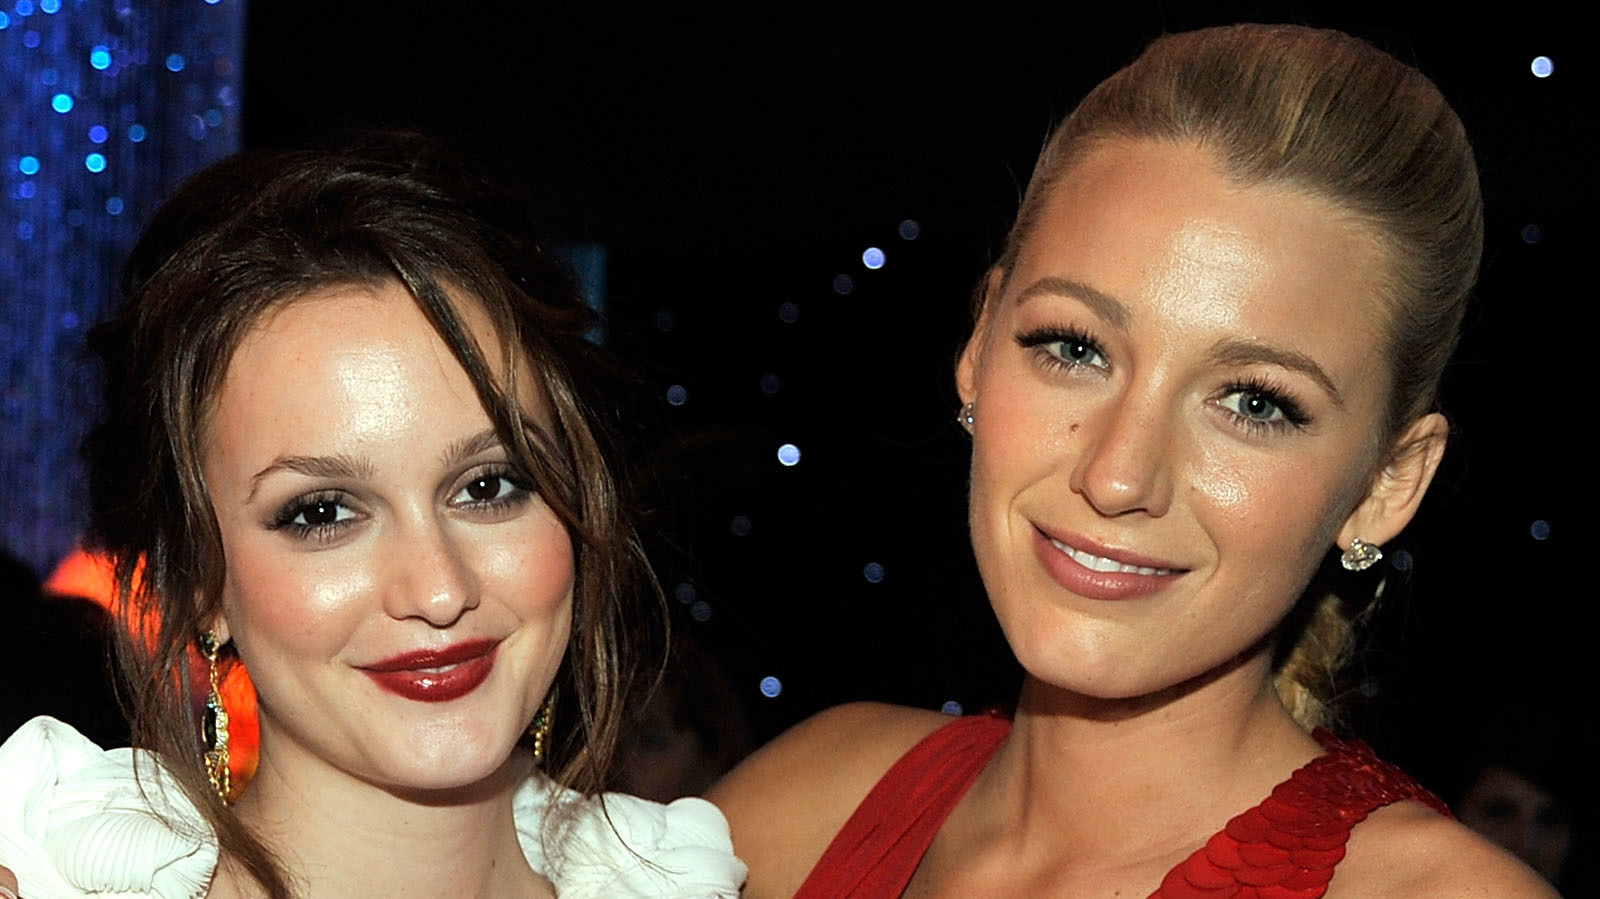 The Exact Lip Glosses Blake Lively And Leighton Meester Wore In Gossip Girl